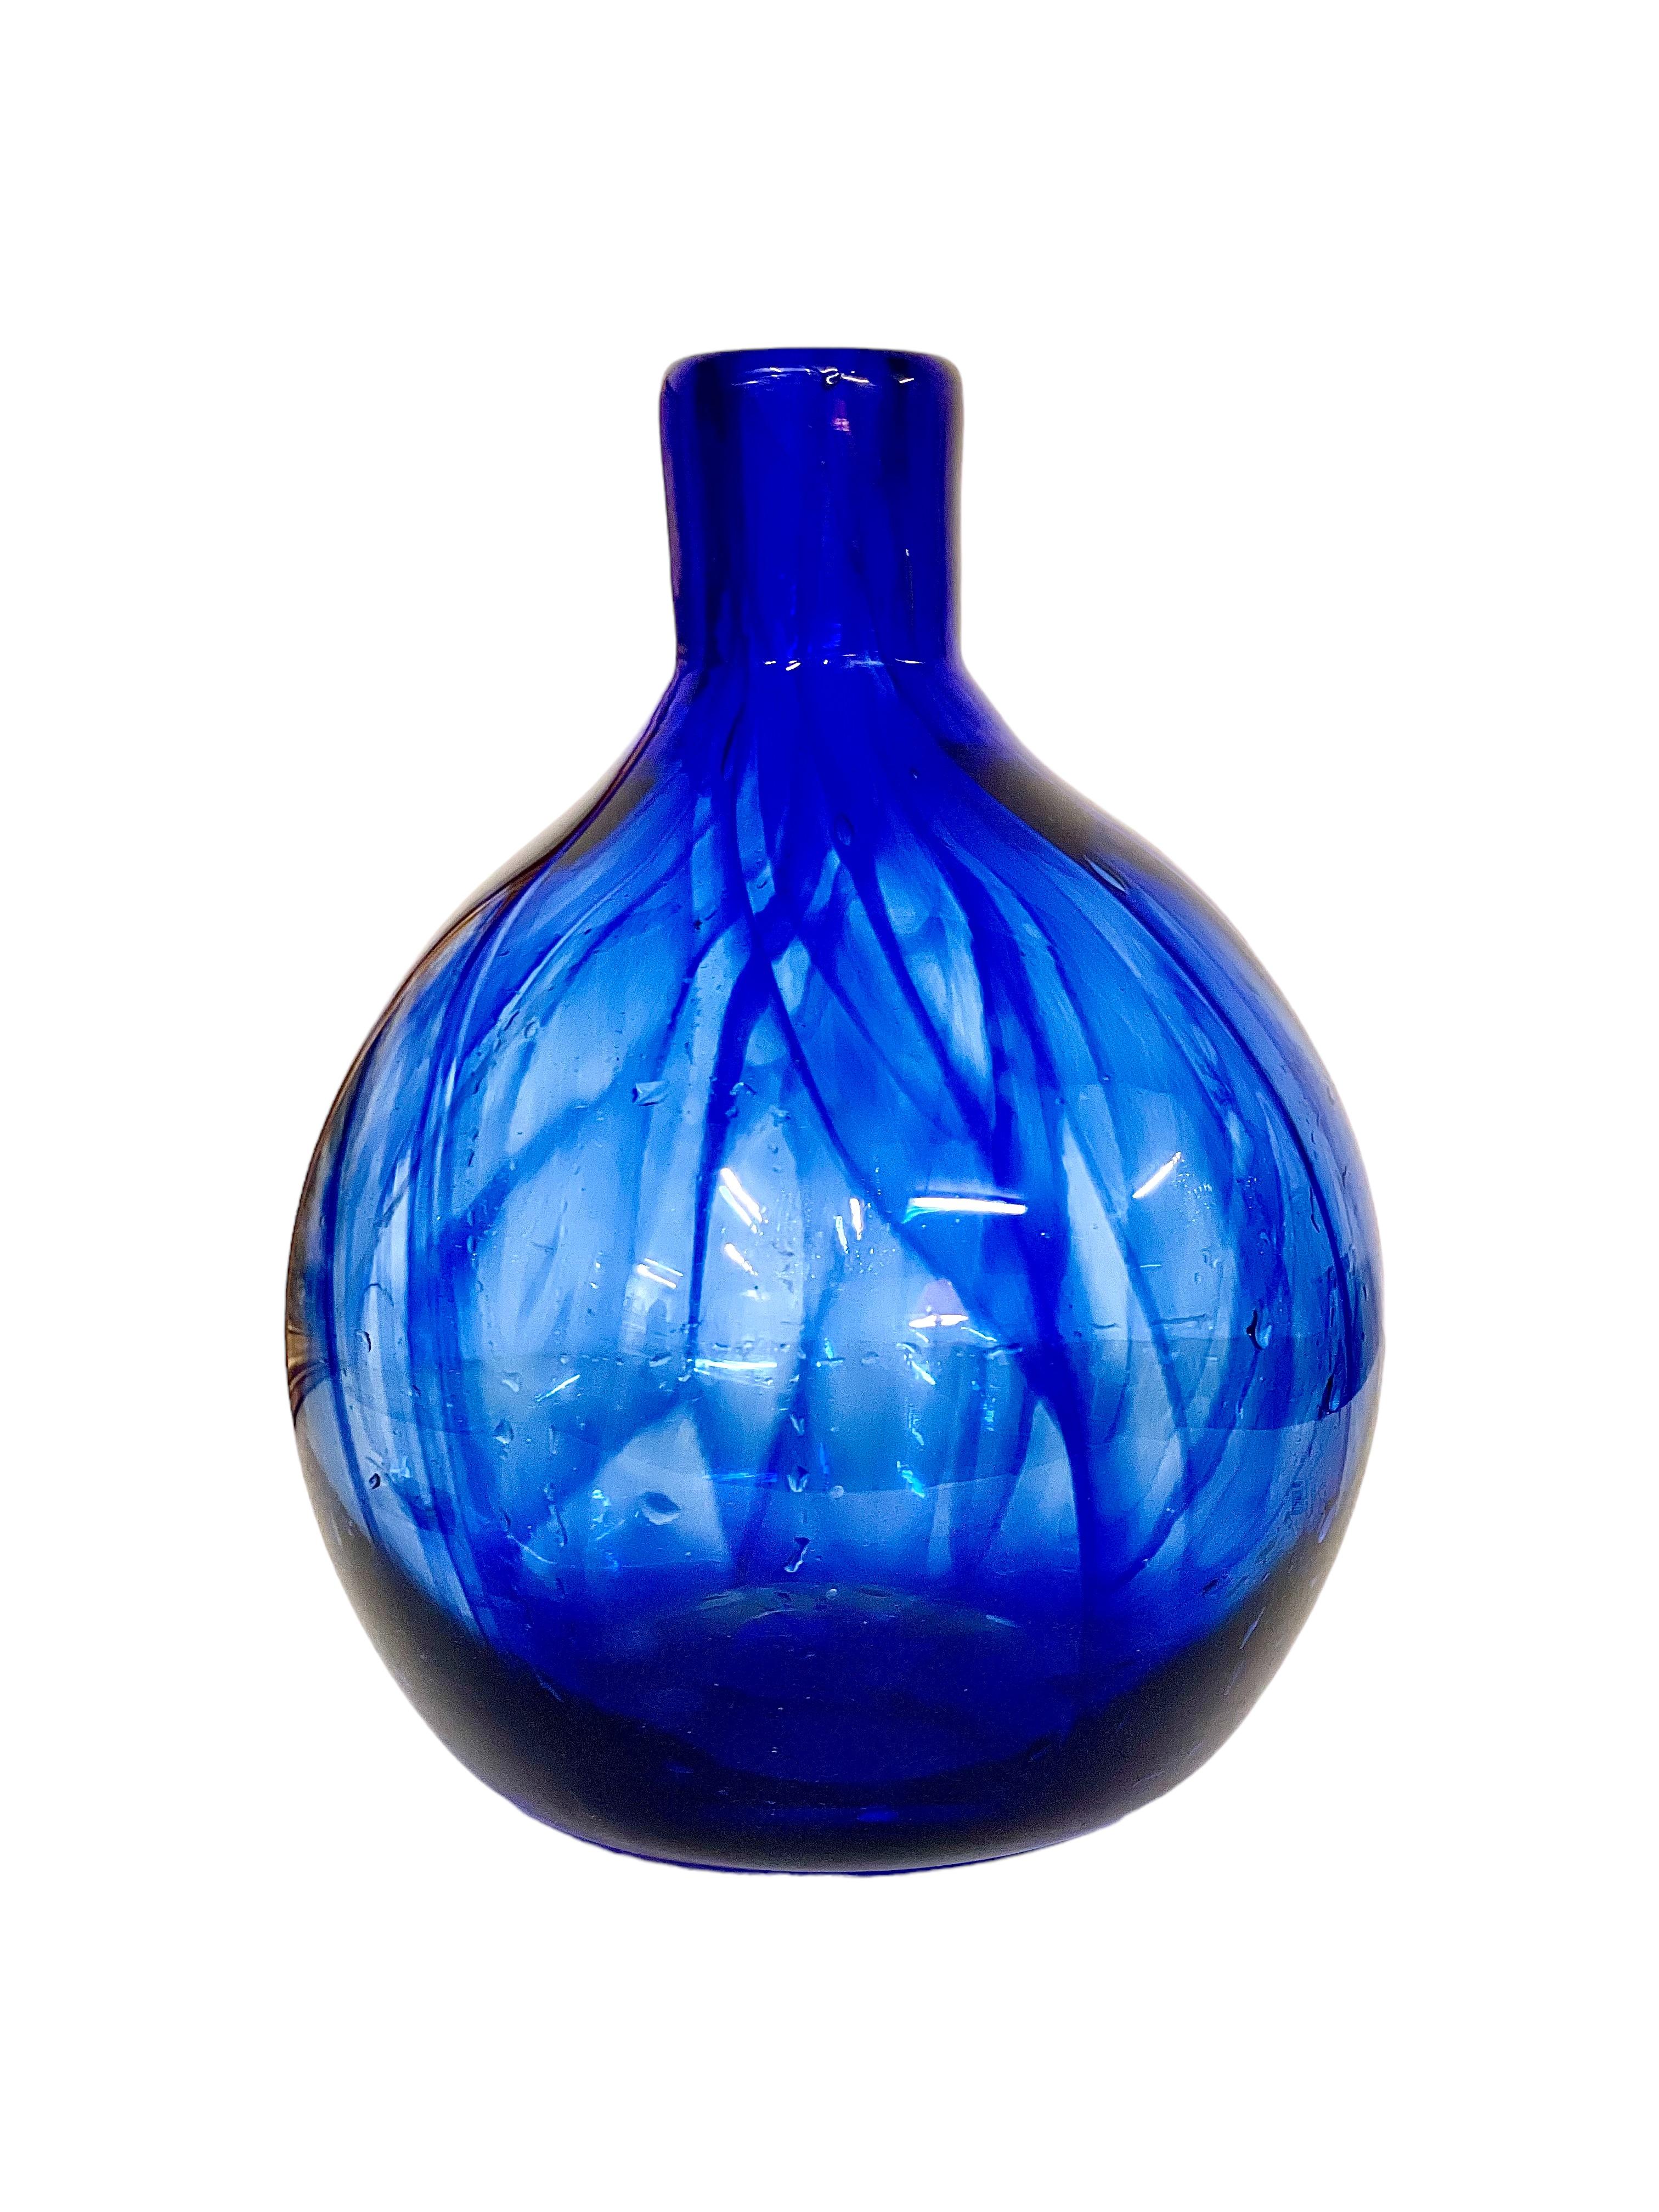 This vintage French mouth-blown glass vase or bottle in vivid blue was made by world-renowned French glassblower Jean Claude Novaro, who was born in Antibes in 1943. Crafted in a wonderfully tactile 'onion' shape, this decorative bottle with its